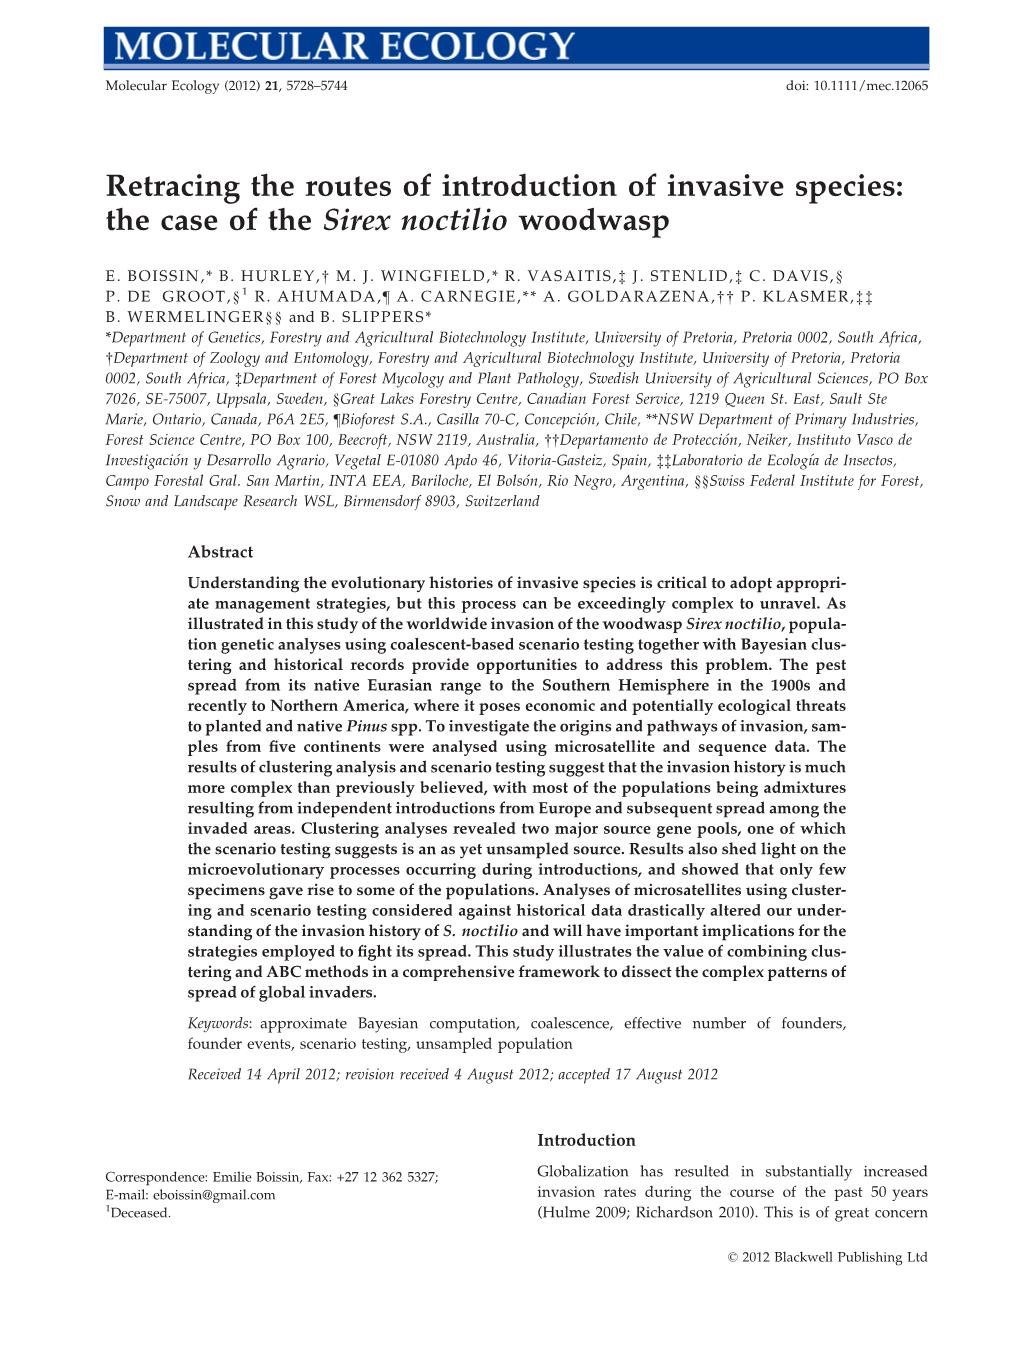 The Case of the Sirex Noctilio Woodwasp